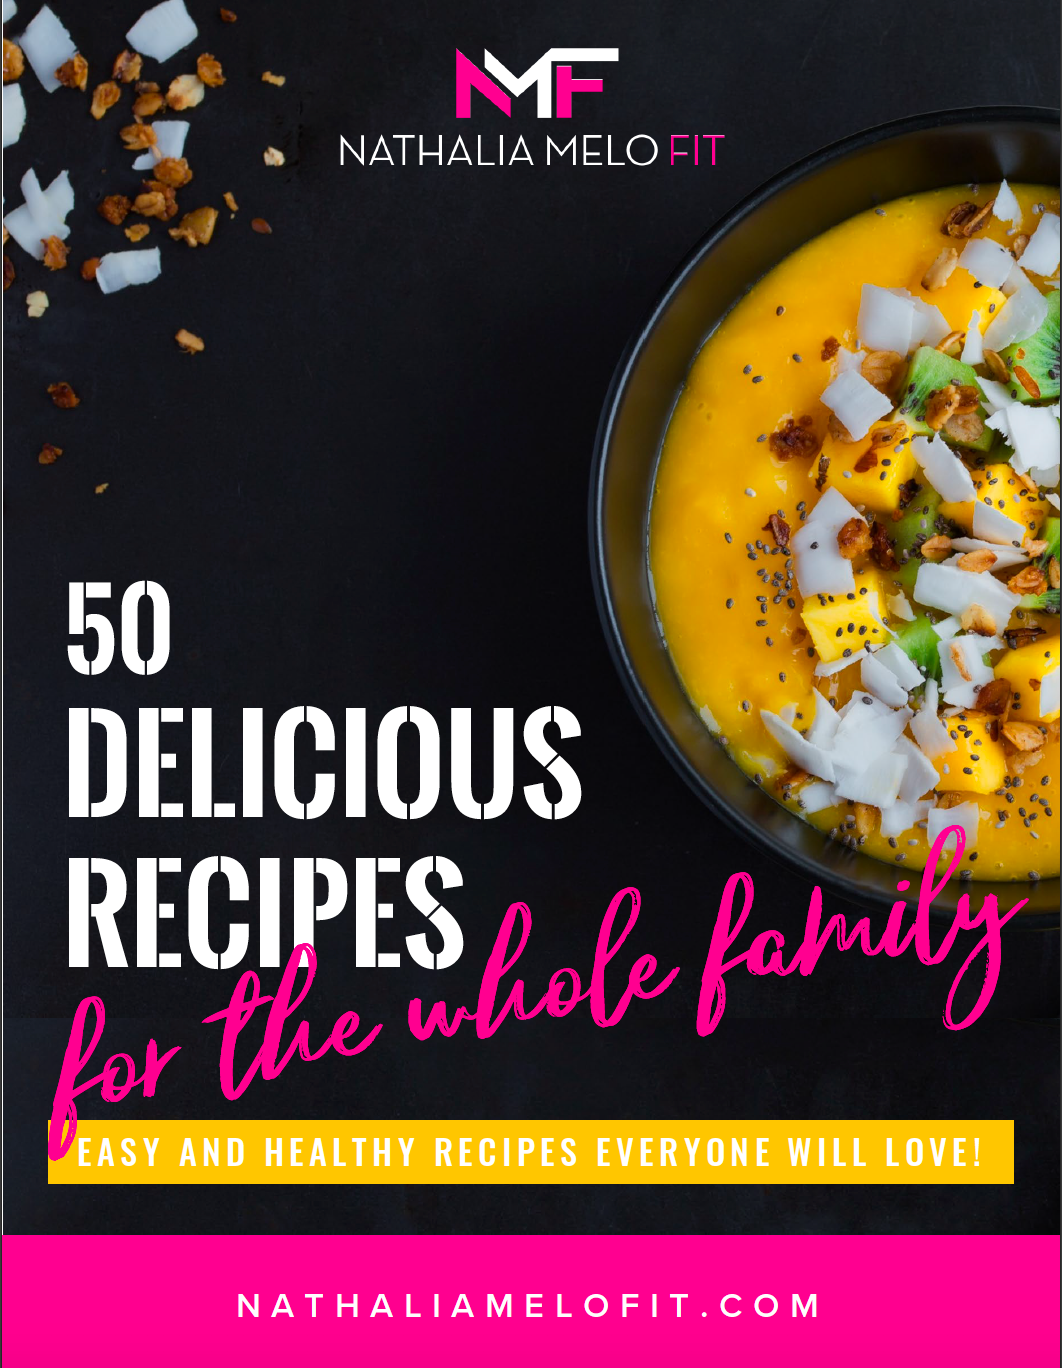 50 Delicious Recipes for the Whole Family